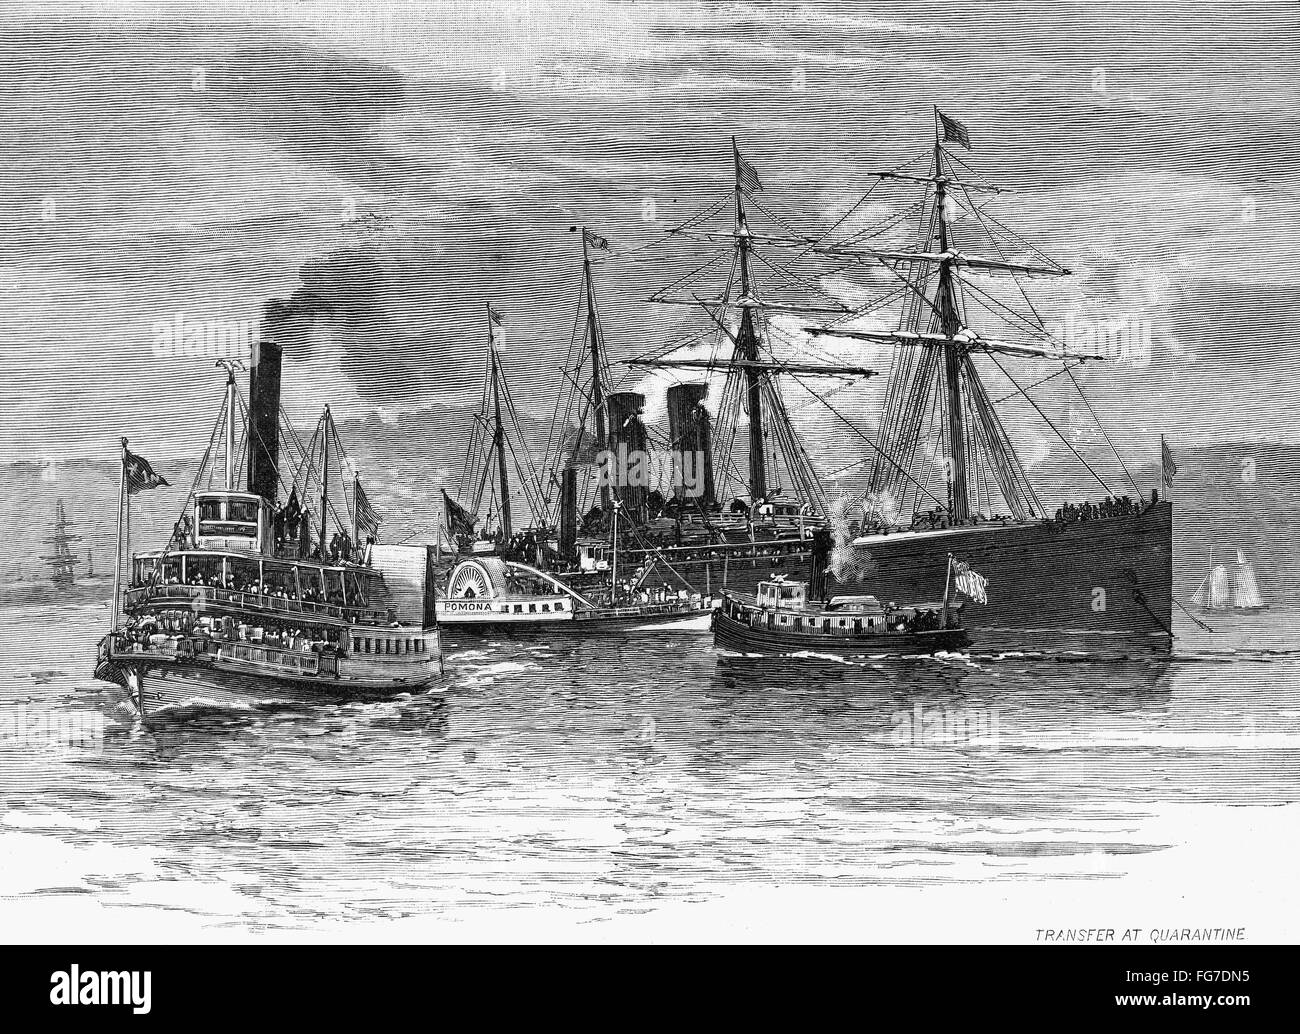 NEW YORK: IMMIGRANT SHIPS. /nTransferring immigrants from quarantined ships in New York Harbor. Wood engraving, American, 1884. Stock Photo